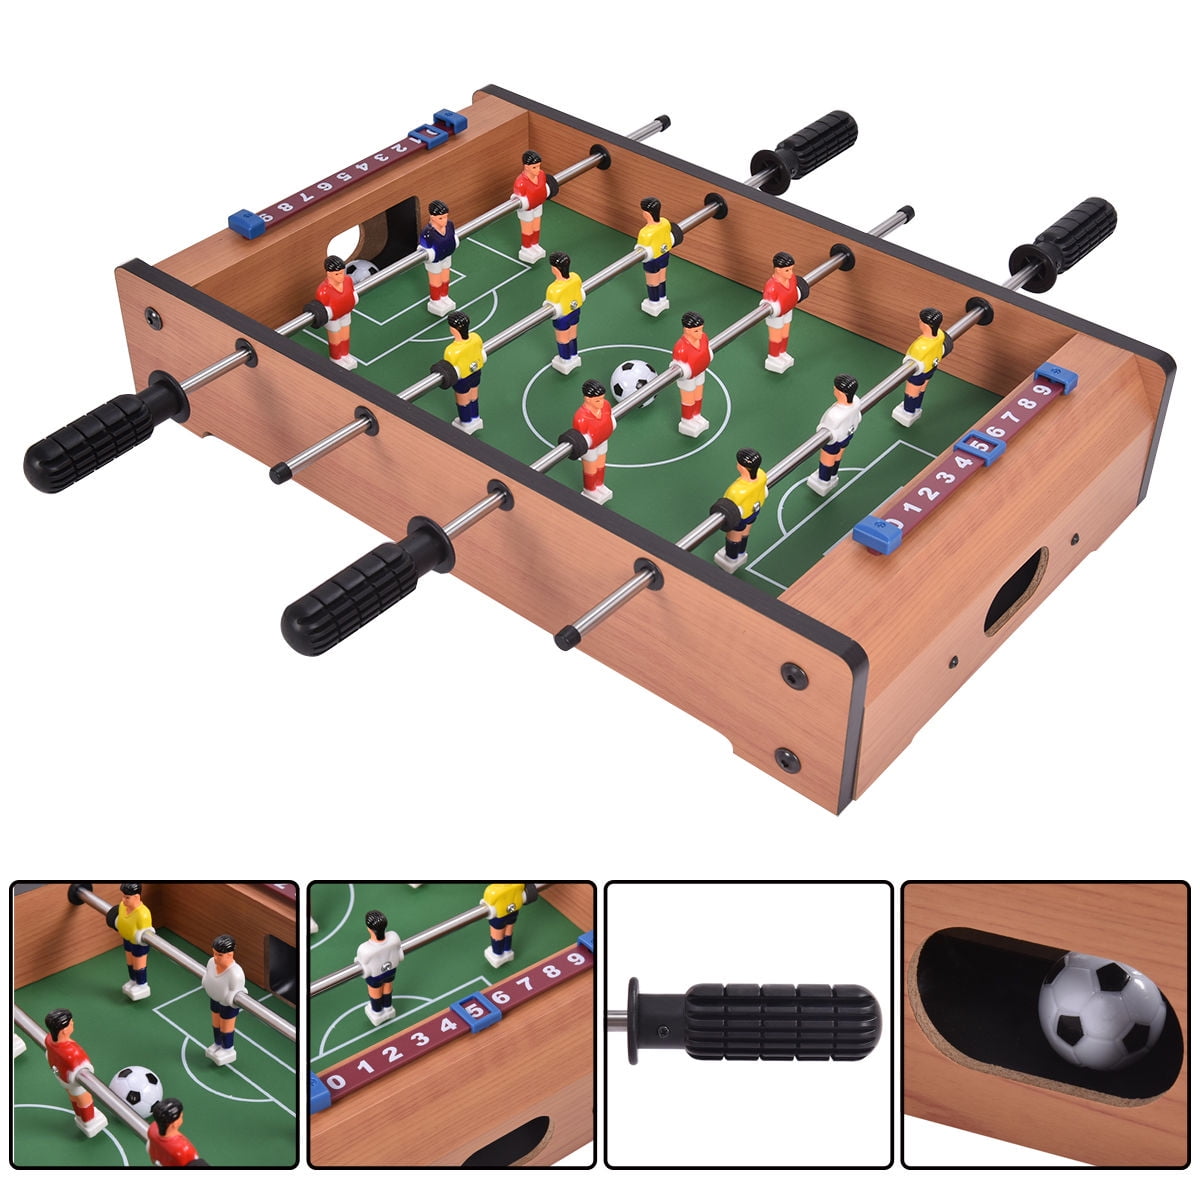 CIGOCIVI 20” Foosball Table Games for Family Game Night with Kids Portable Mini Tabletop Soccer Games for Adults